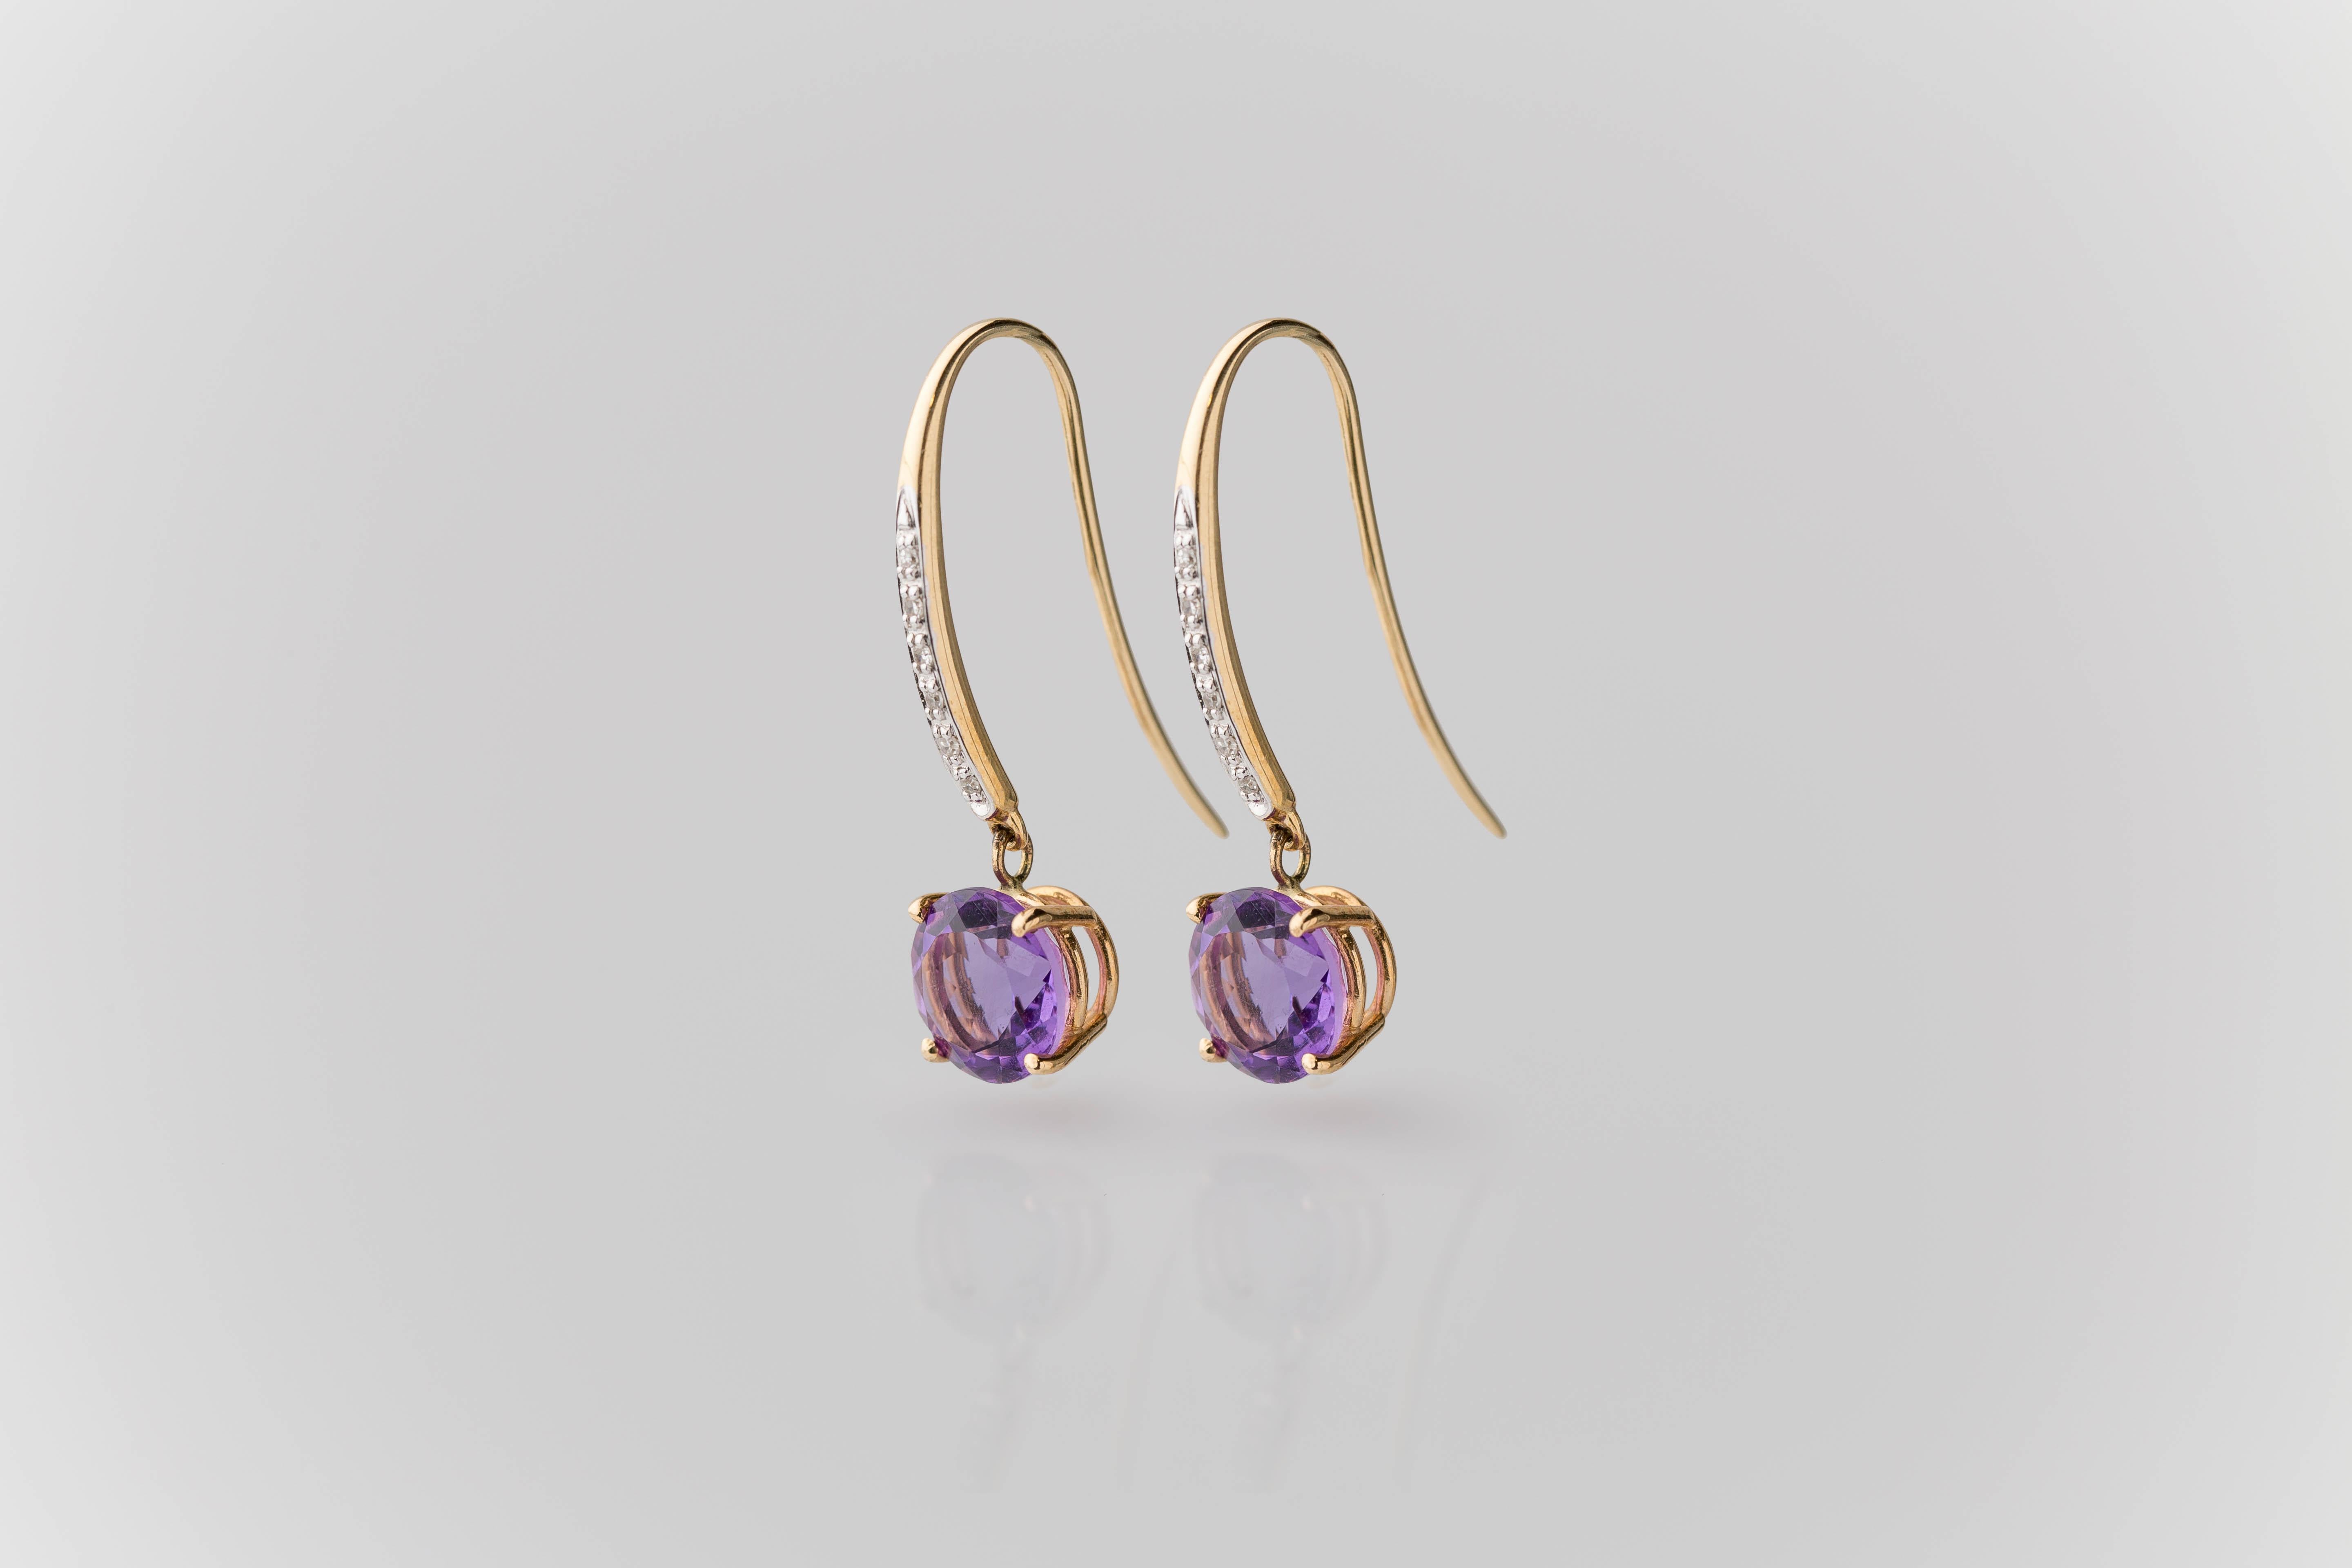 These earrings exude an undeniable beauty that captivates the eye. Crafted with meticulous attention to detail, each earring features vivid purple round brilliant-cut amethysts, totaling 3.28 carats, set on solid 14K yellow gold heavy basket-style